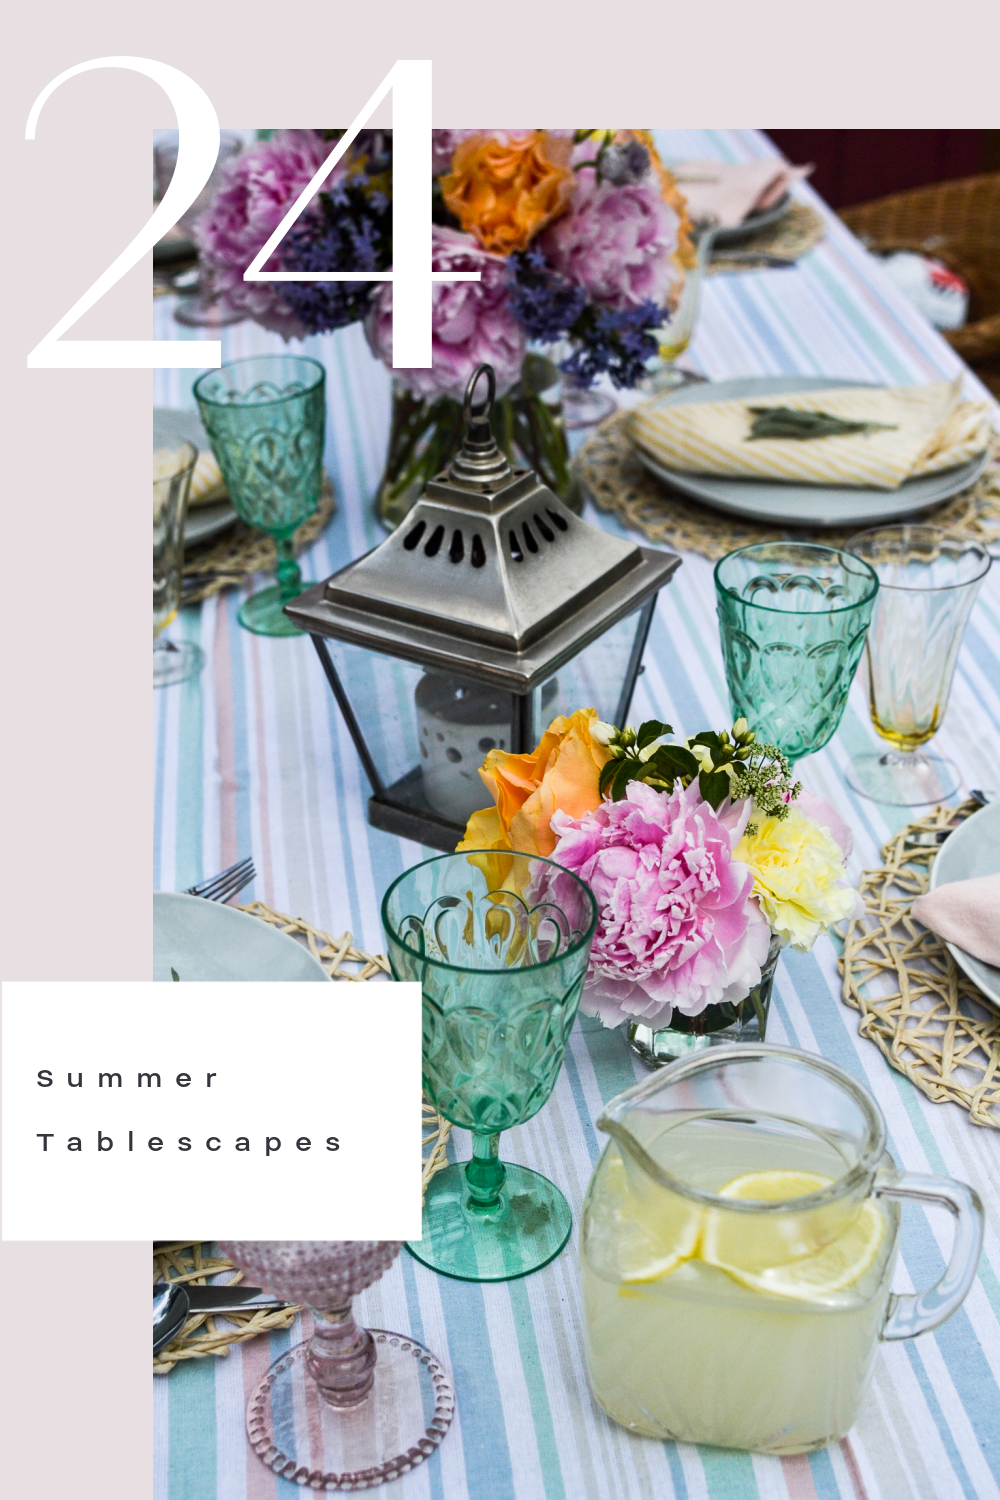 Pinterest Pin for 24 Summer Tablescapes showing an outdoor table with bright tableware